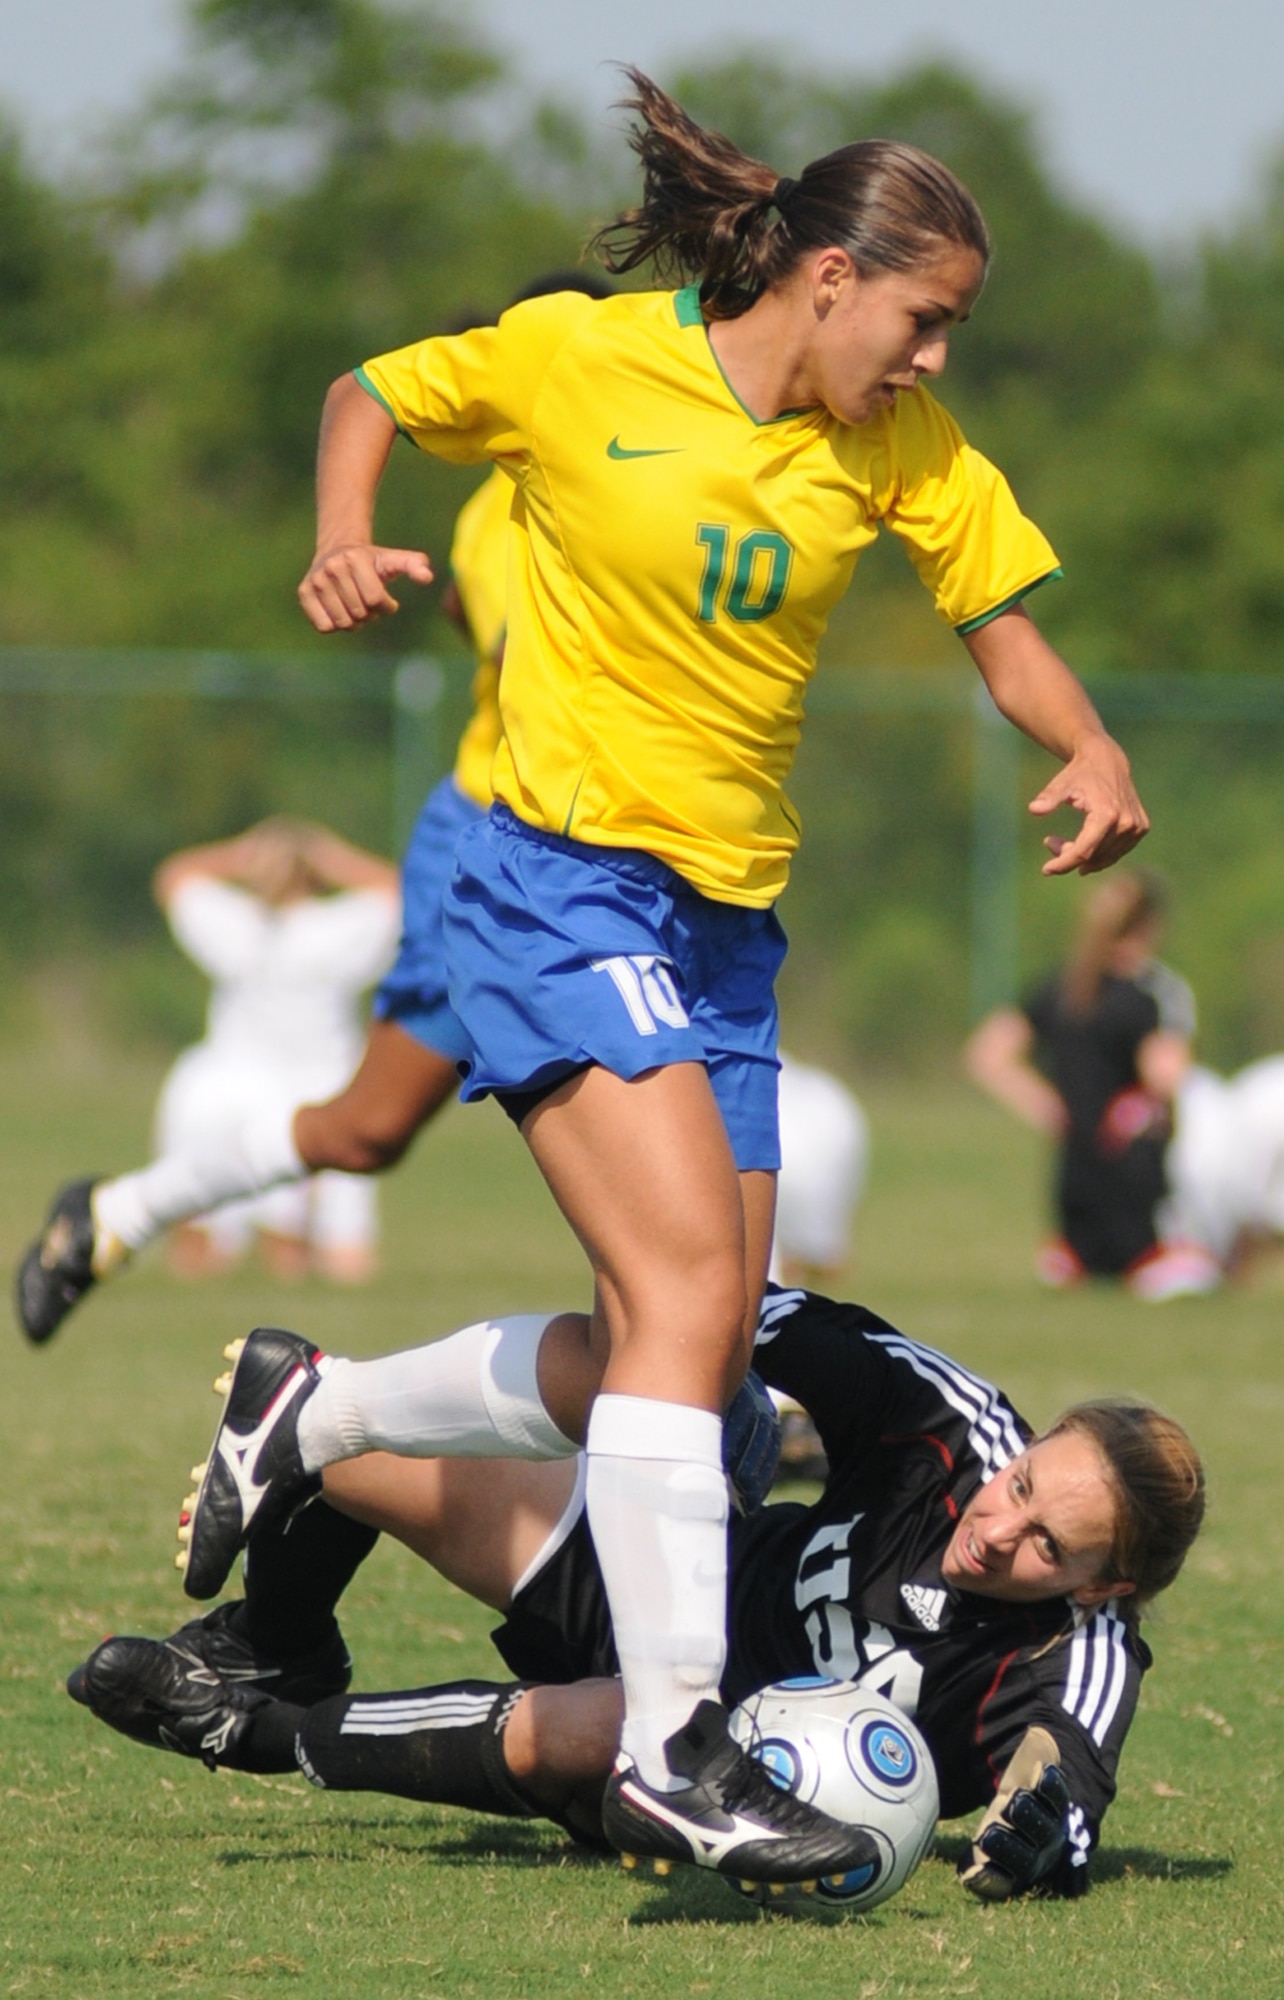 Brazil’s Rebeca Lopez De Oliveira gets the ball past USA’s Marietta Squire to score in a June 9 game at Gulfport’s Sport Complex.  Brazil won, 3-0.  (U.S. Air Force photo by Kemberly Groue)